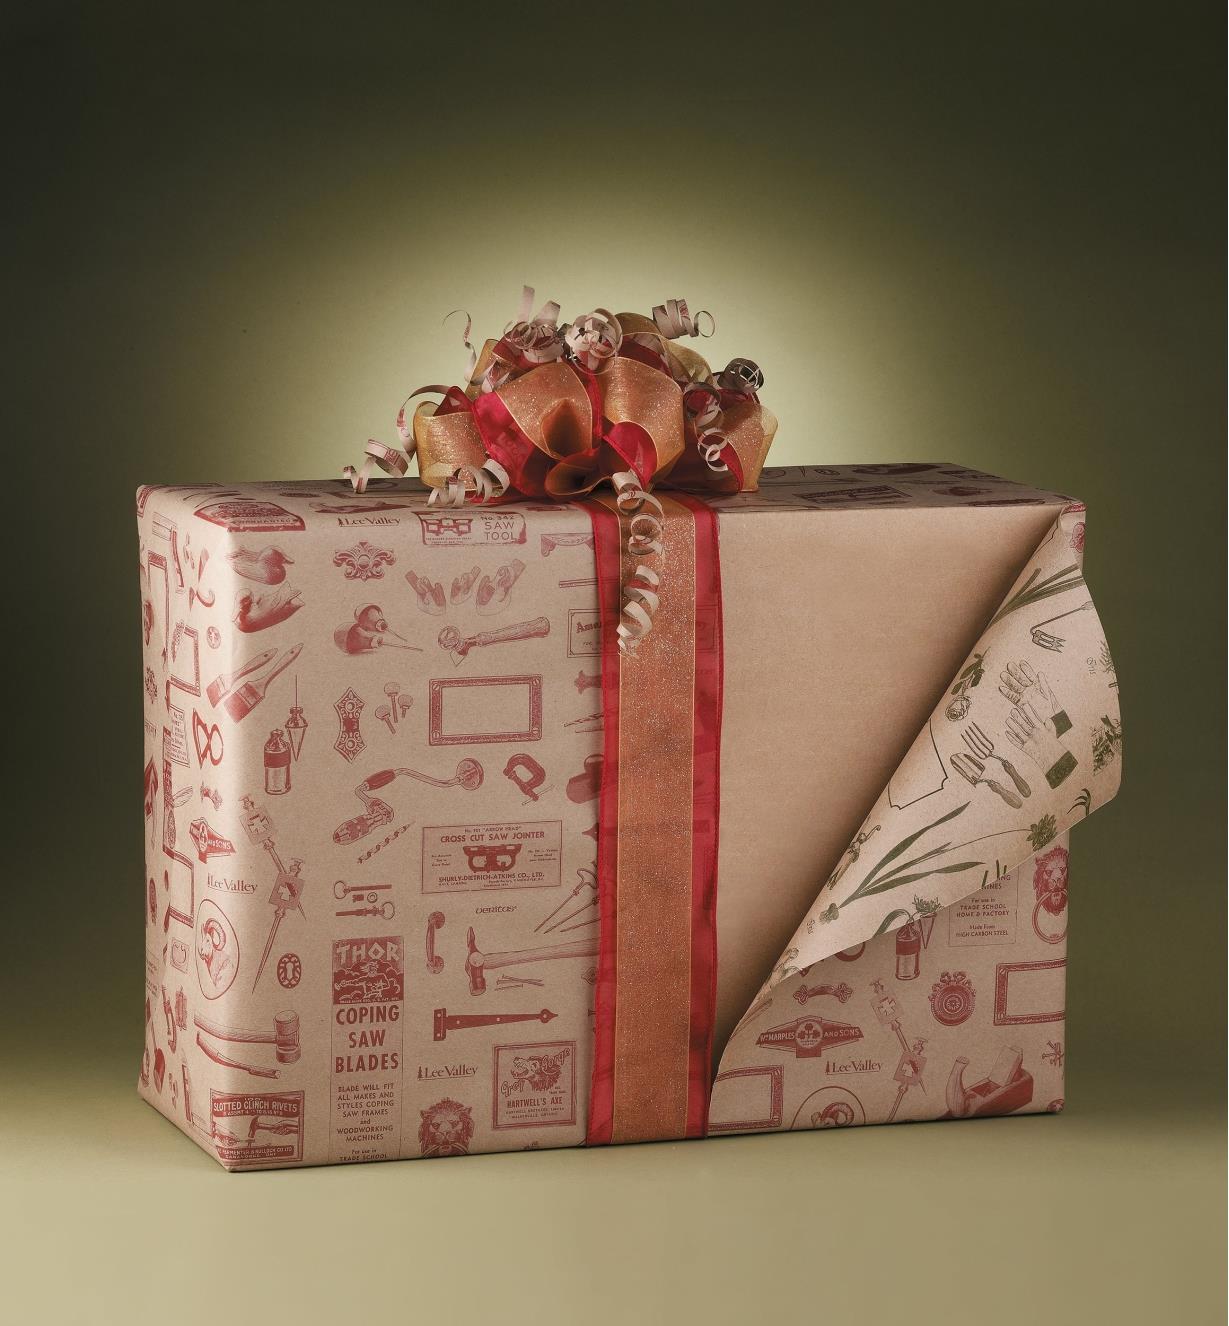 A present wrapped in Lee Valley wrapping paper with one side flipped down to show both patterns